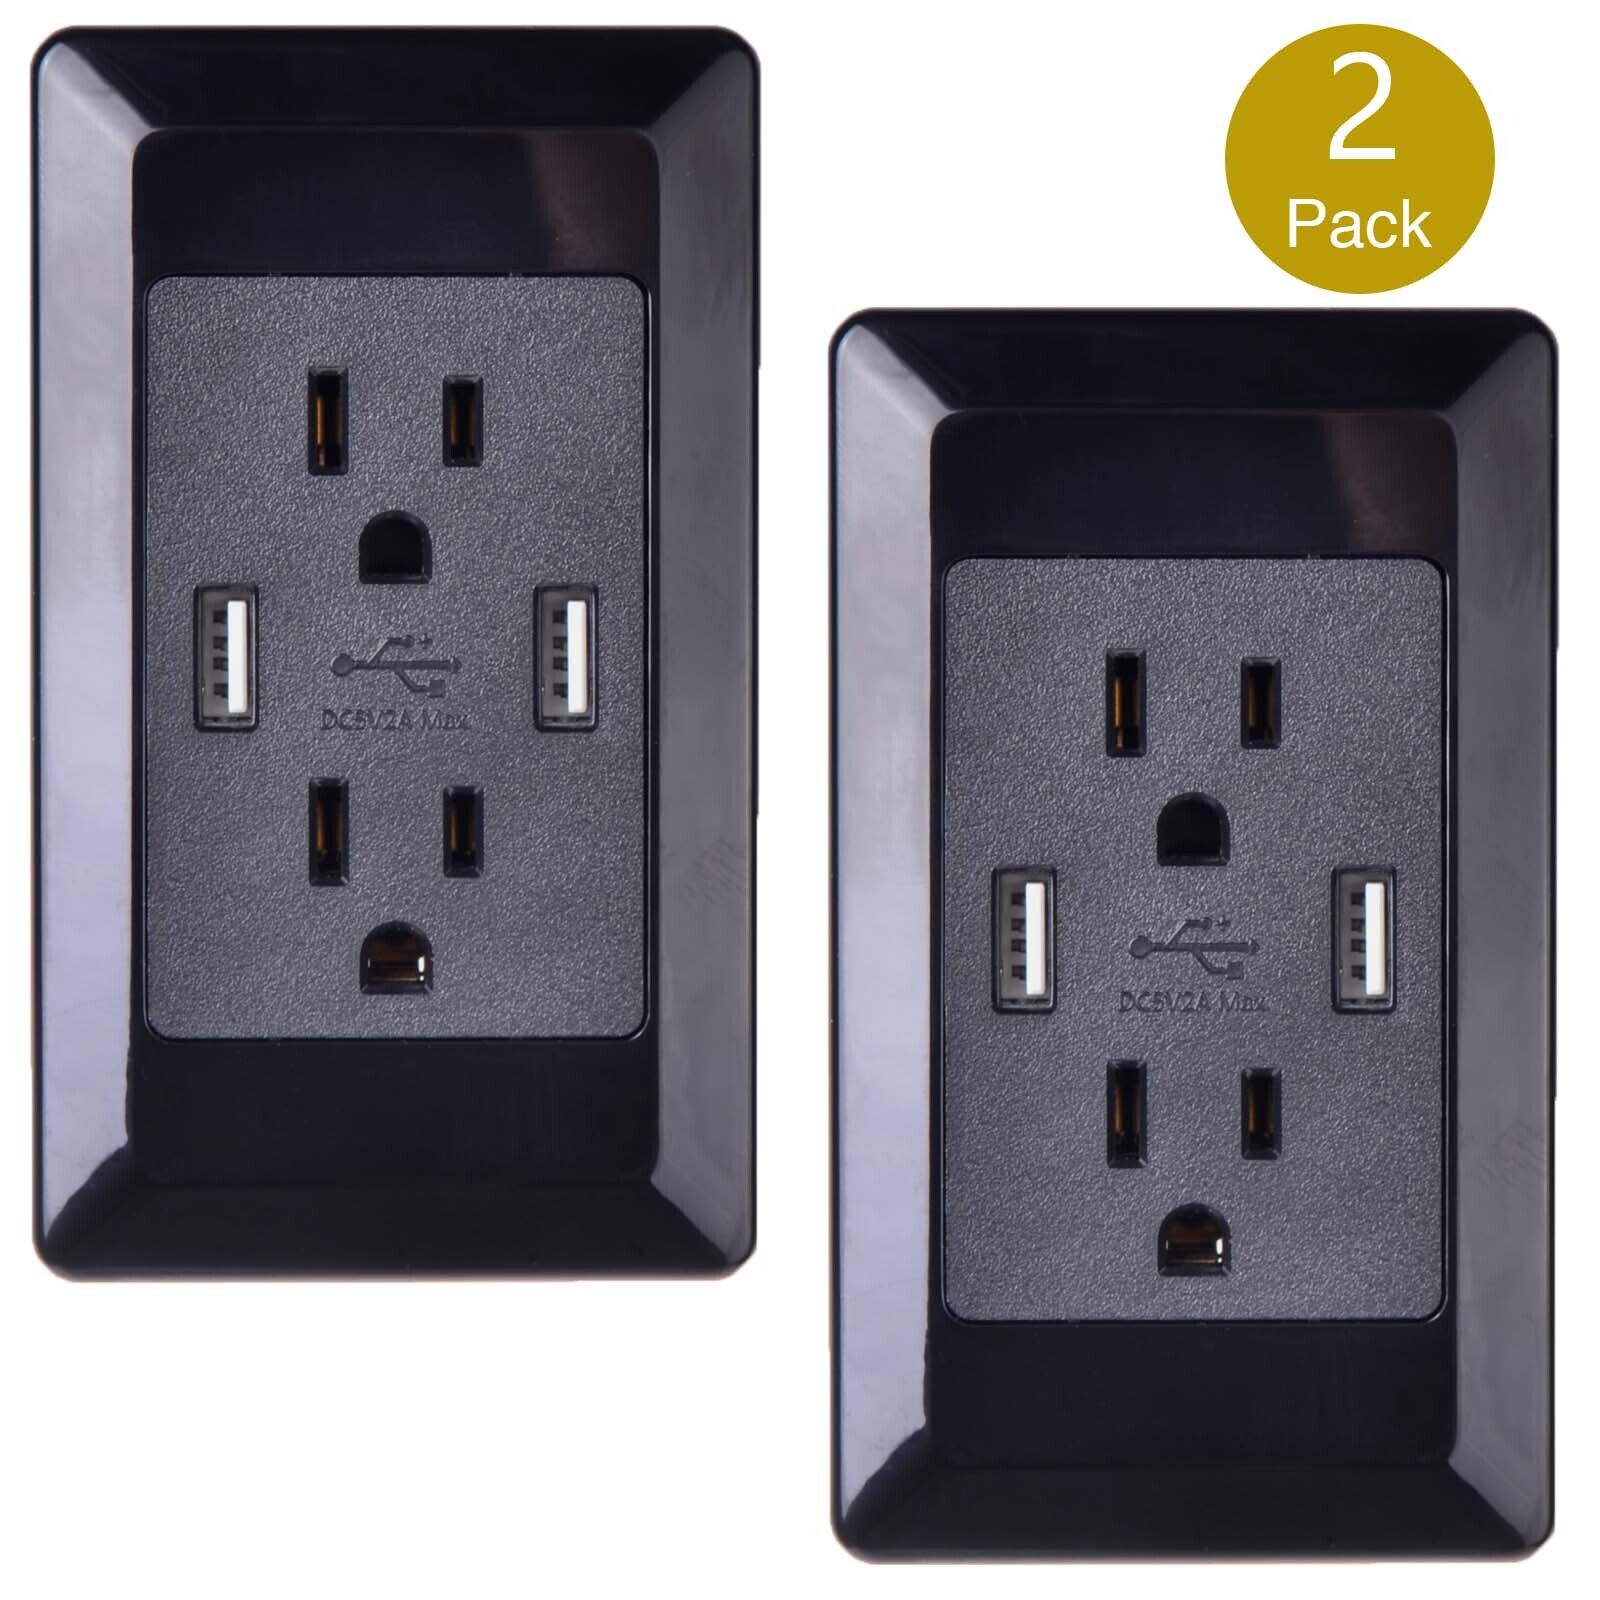 2PK Black Dual USB Wall Plate Charger Adapter Receptacle Socket Plug Outlet New